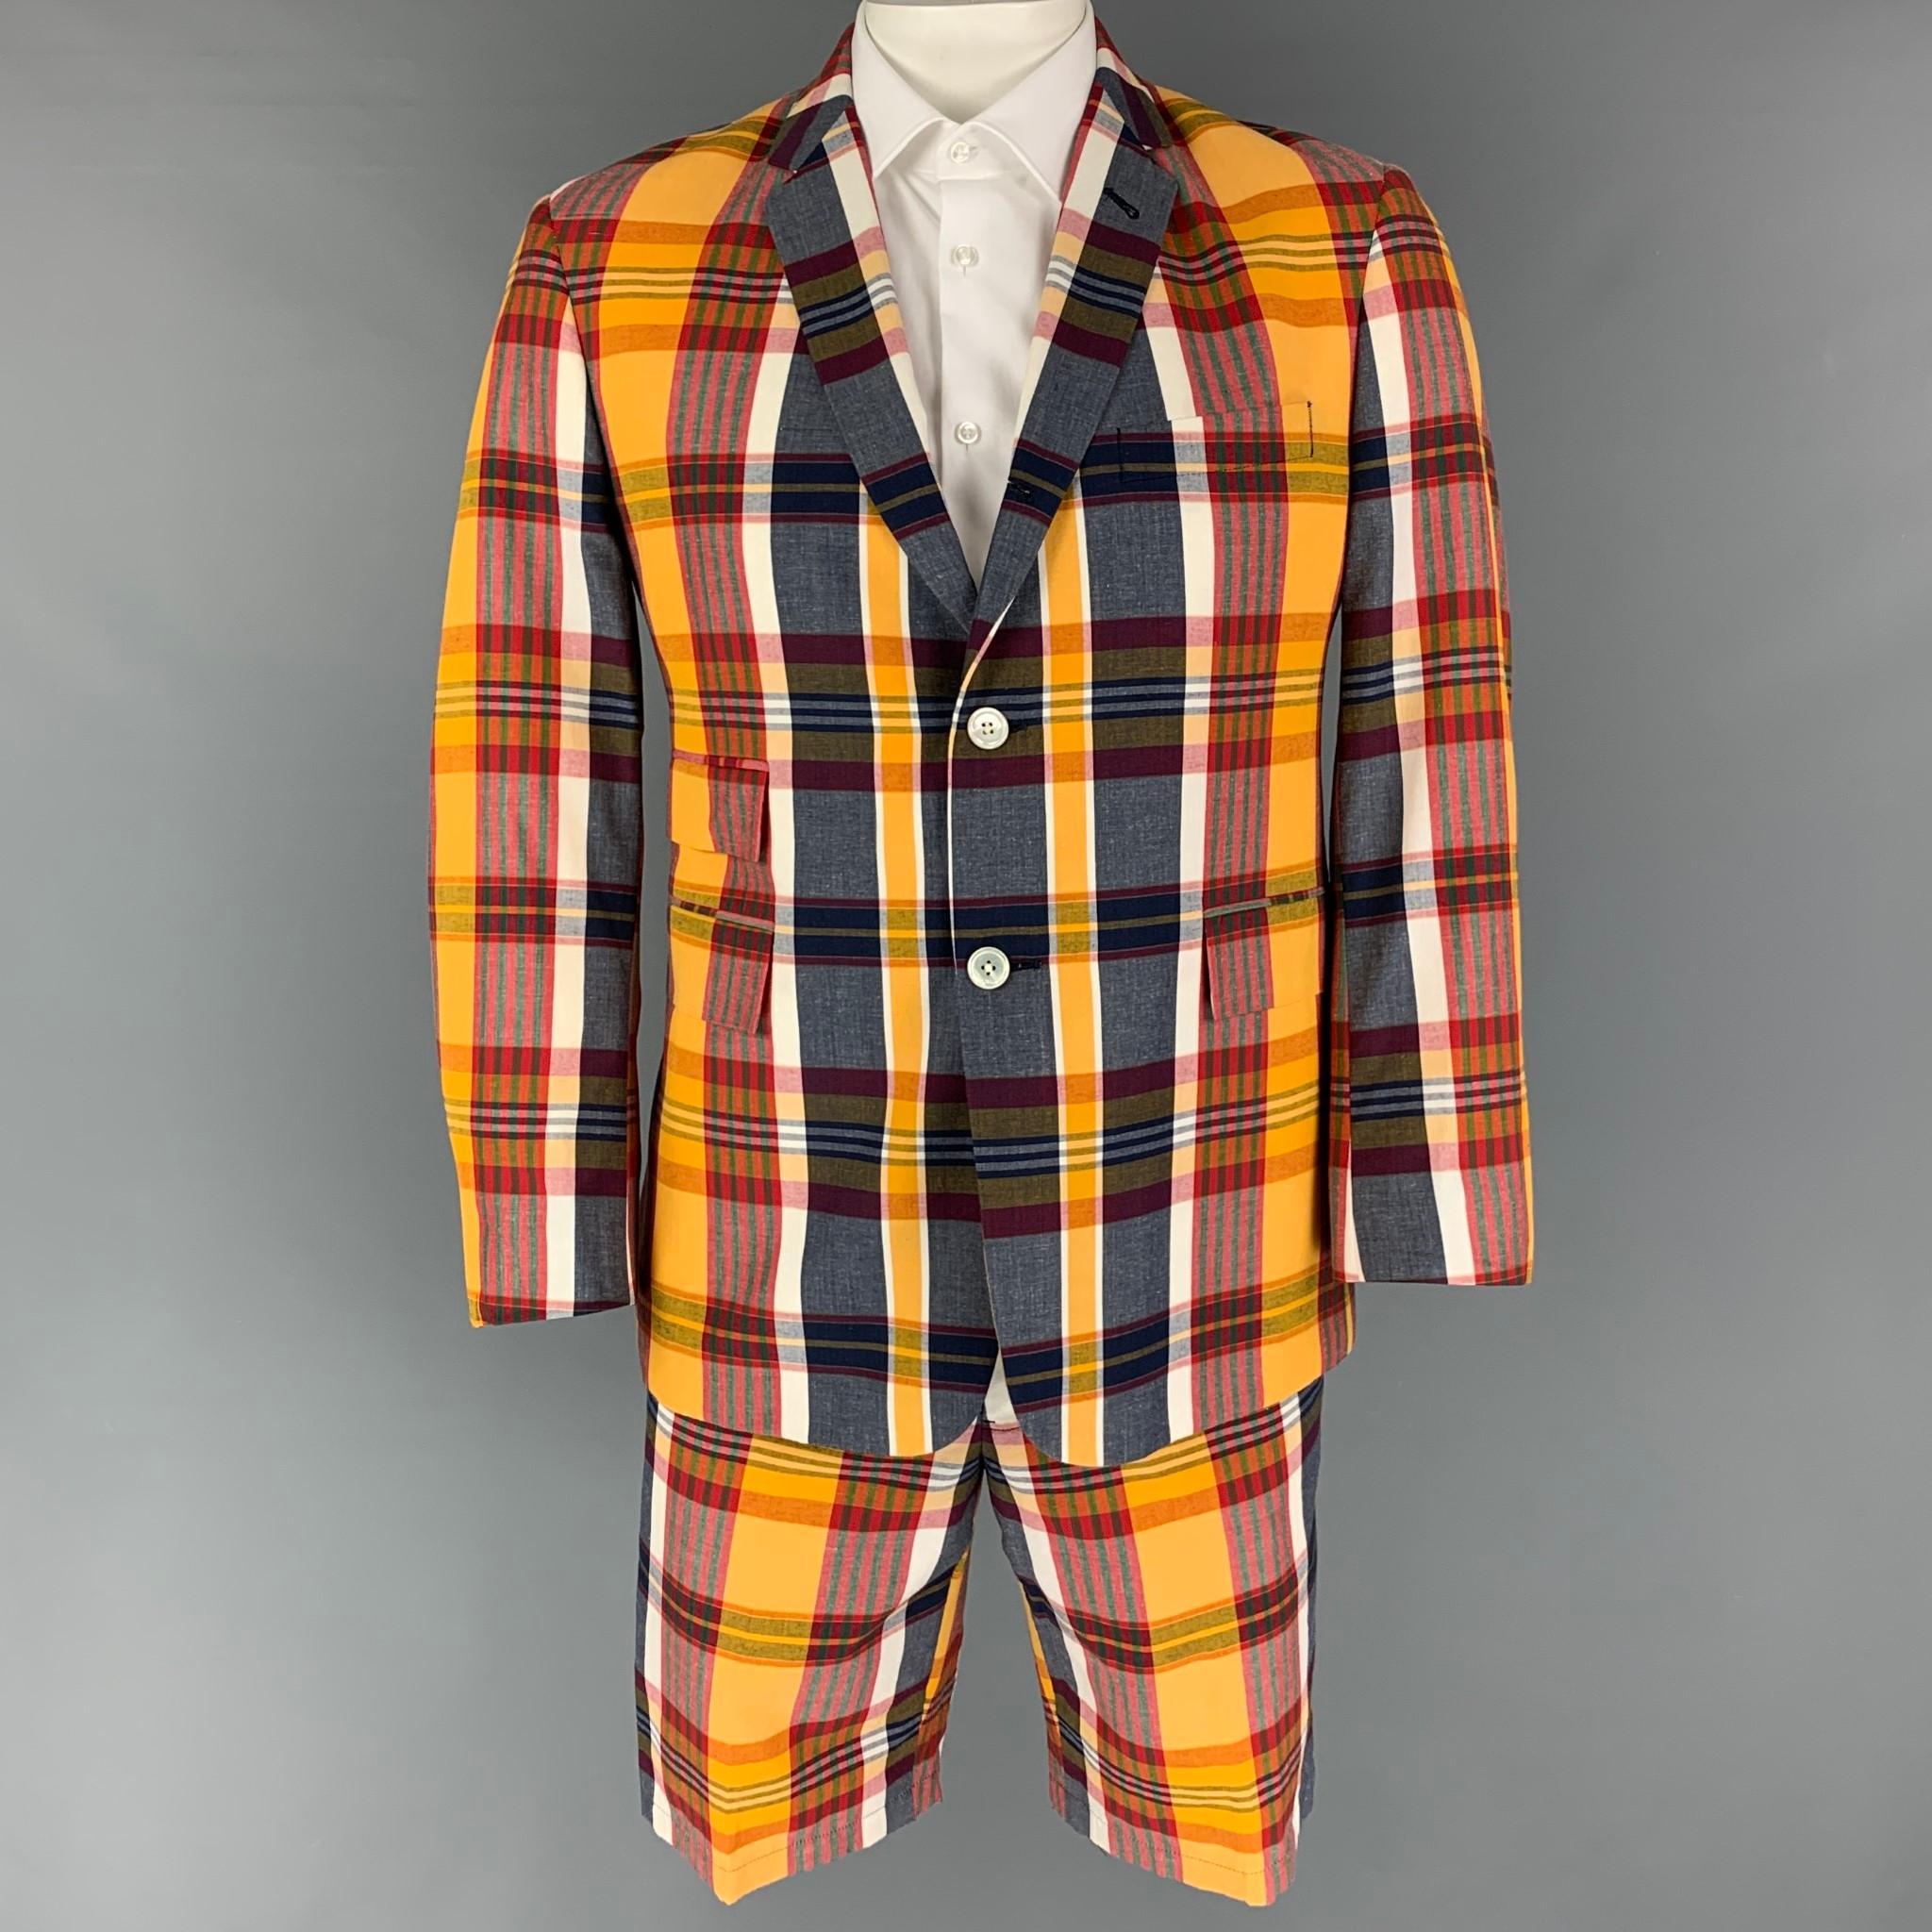 BLACK FLEECE suit comes in a yellow & multi-color plaid cotton with a half liner and includes a single breasted,  double button sport coat with a notch lapel and matching flat front shorts.

Very Good Pre-Owned Condition.
Marked: